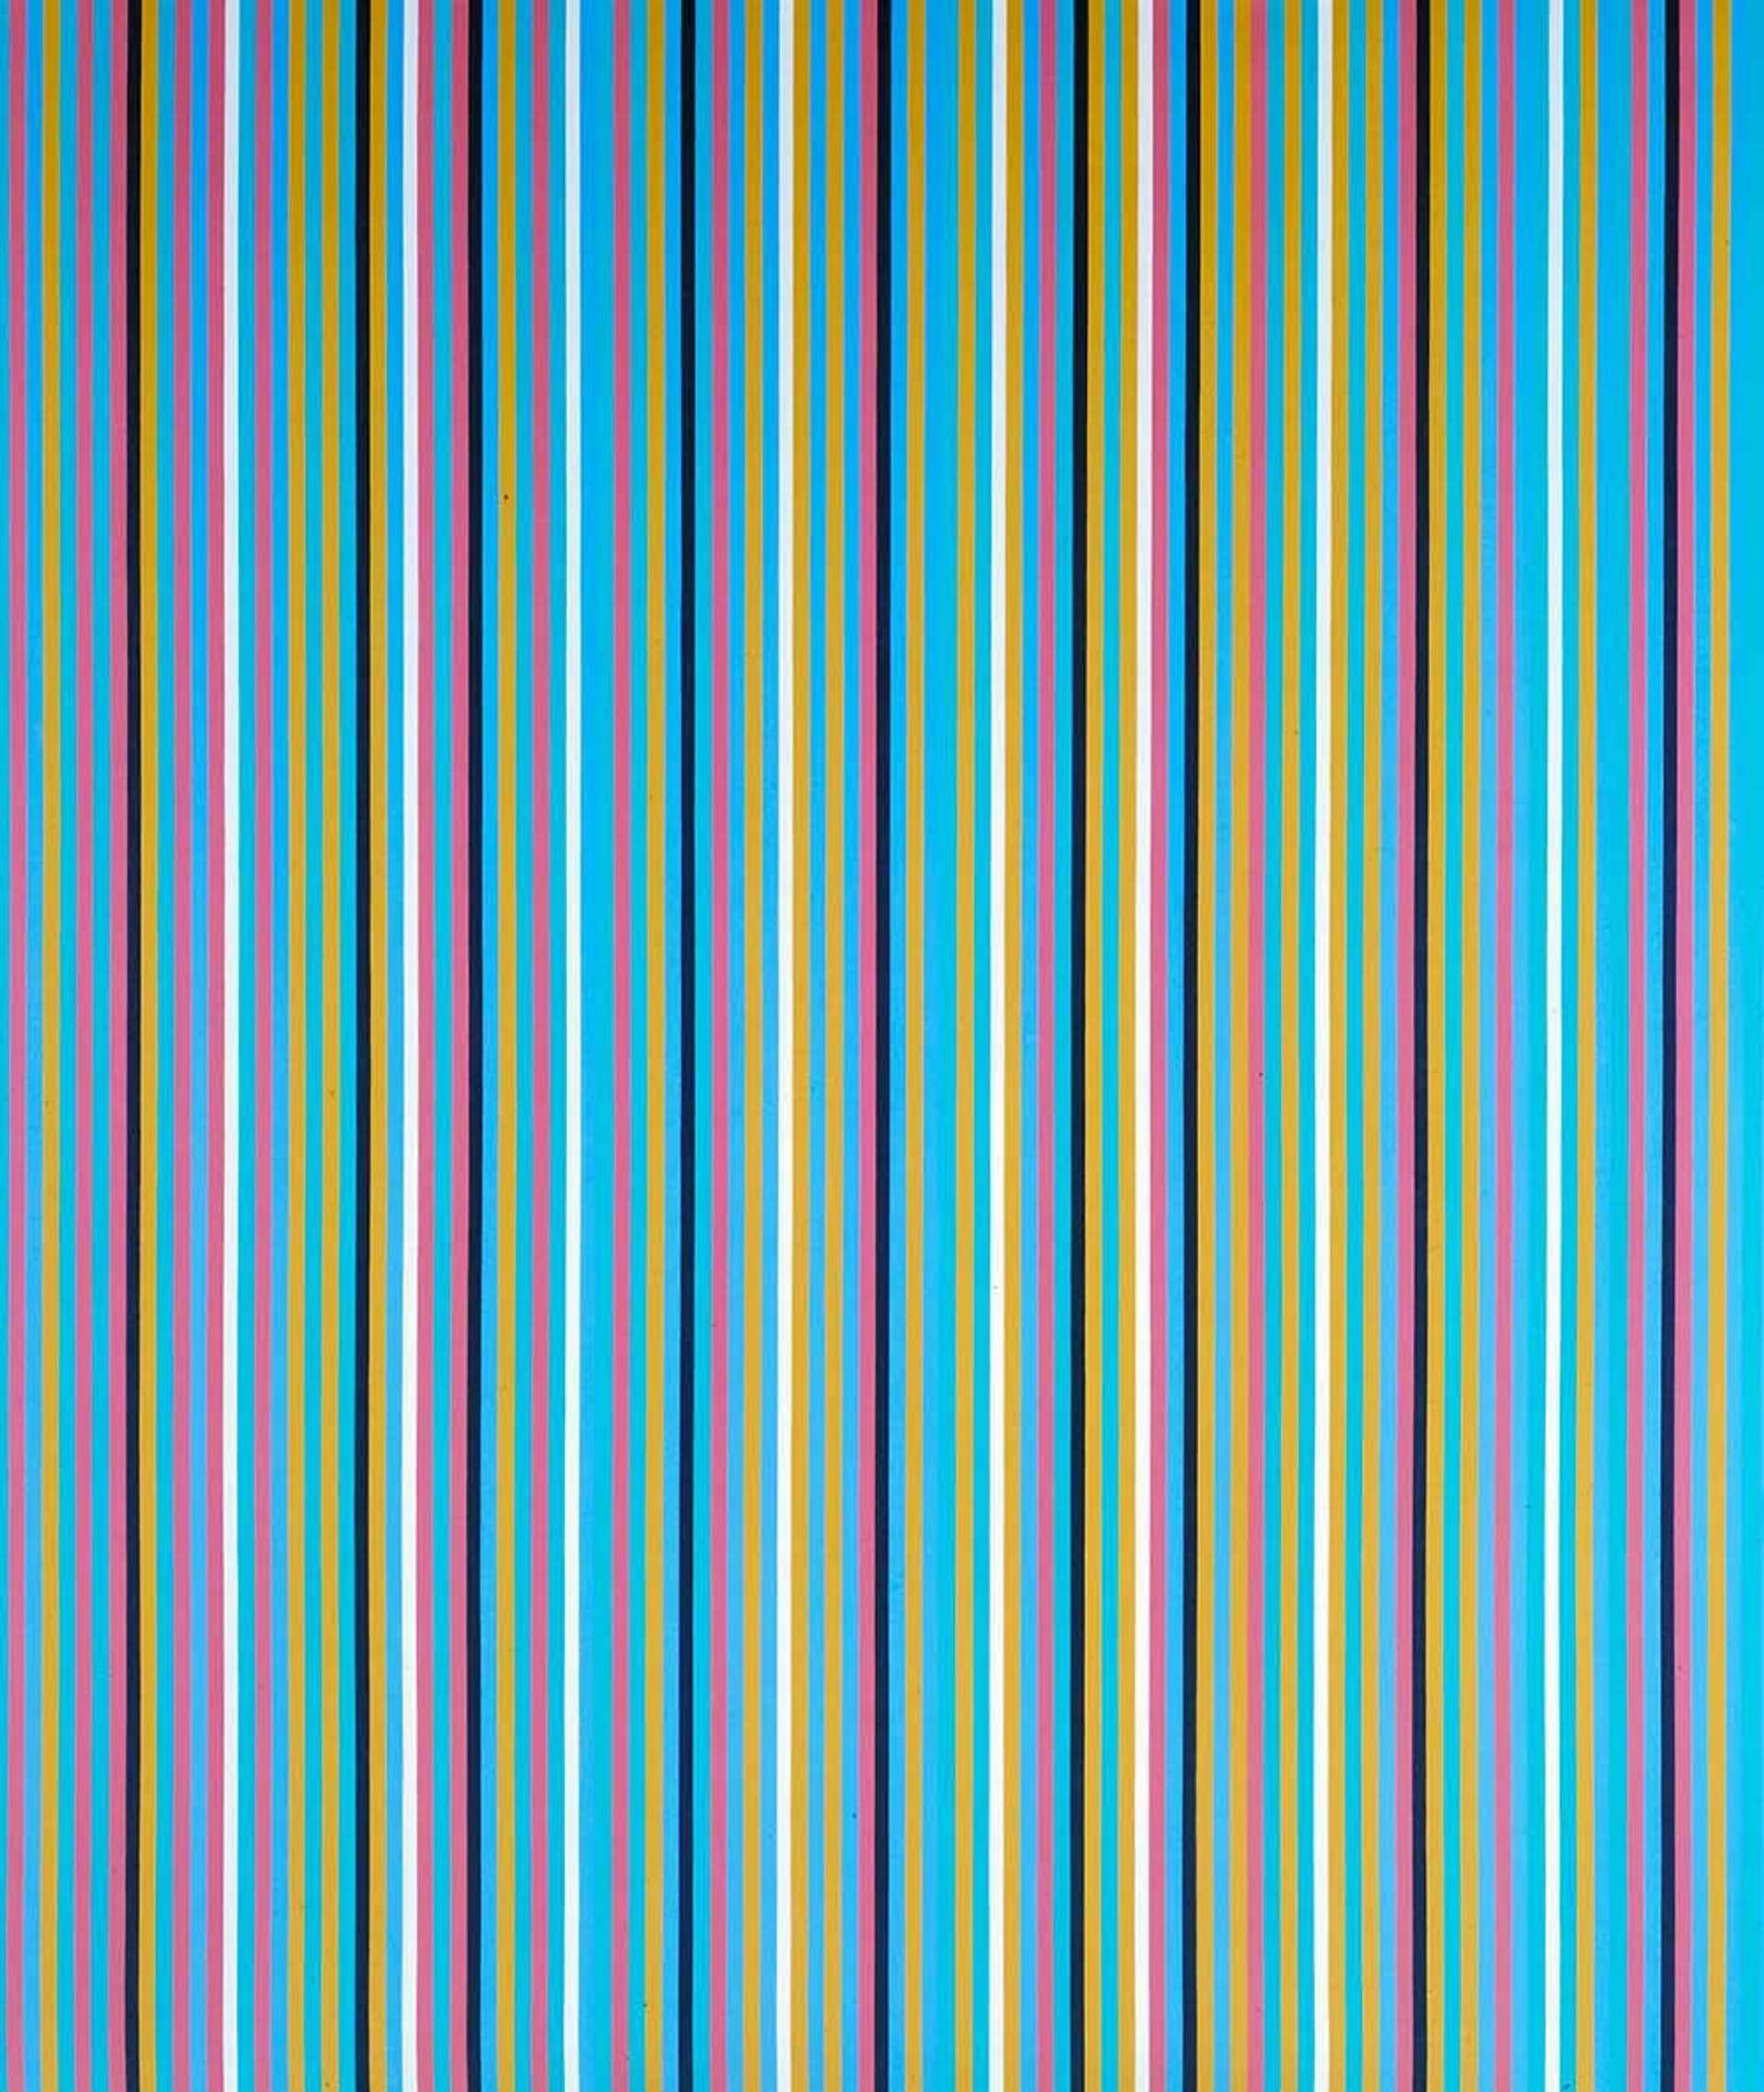 A series of warm coloured stripes unevenly placed against a blue background.